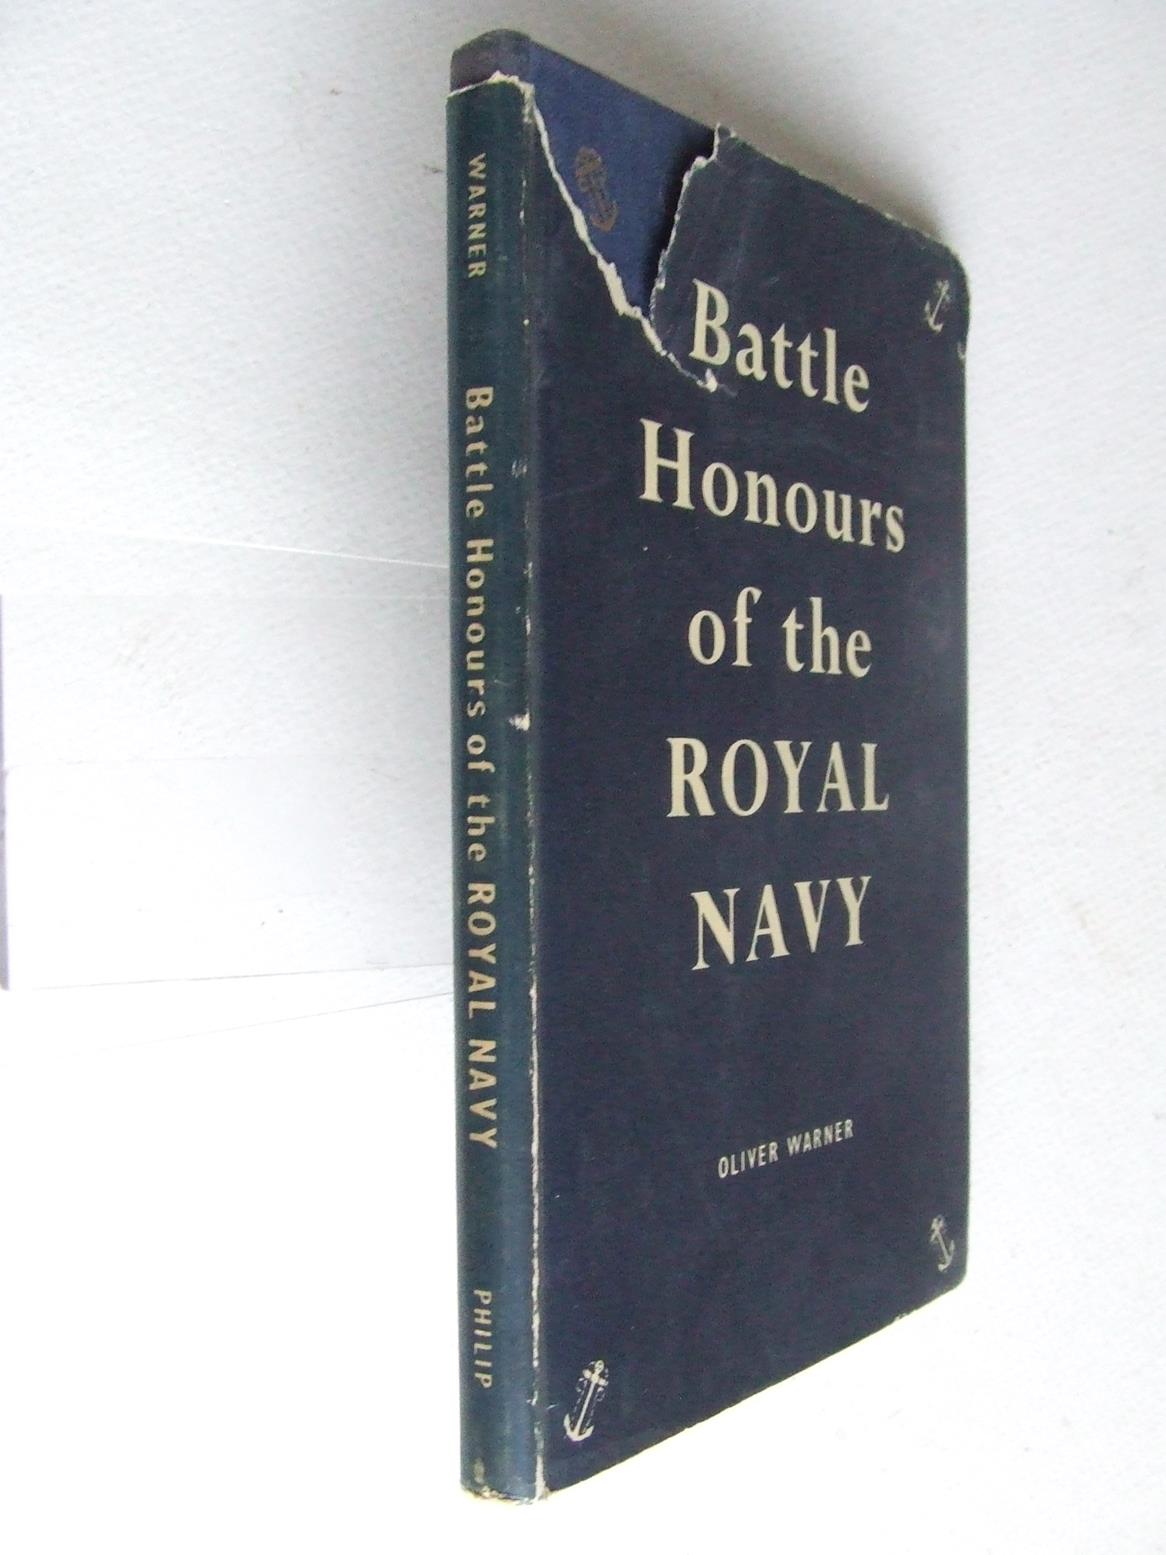 Battle Honours of the Royal Navy